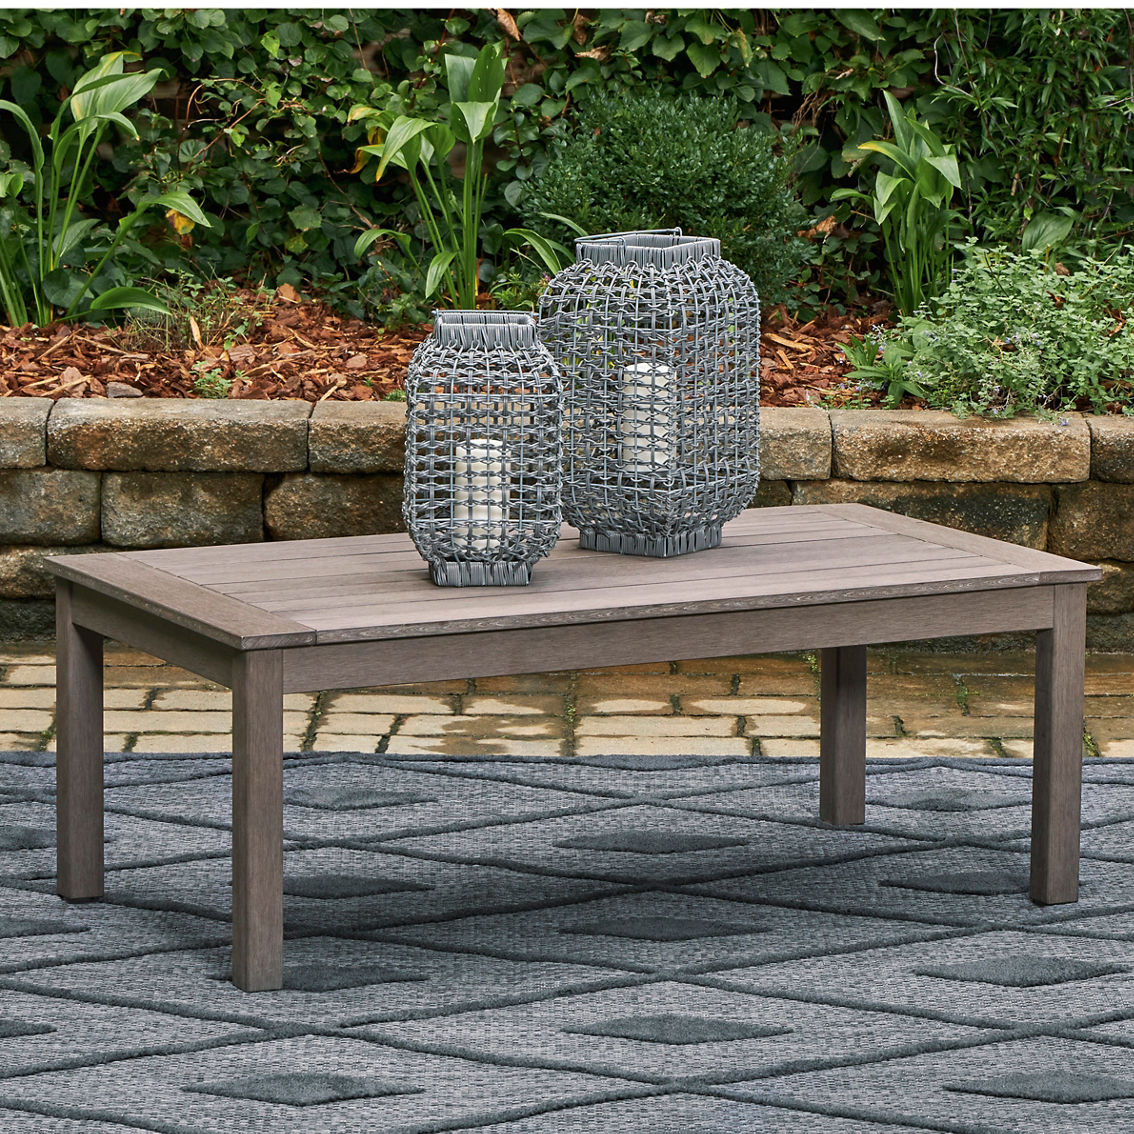 Signature Design by Ashley Hillside Barn Outdoor Coffee Table - Image 4 of 5